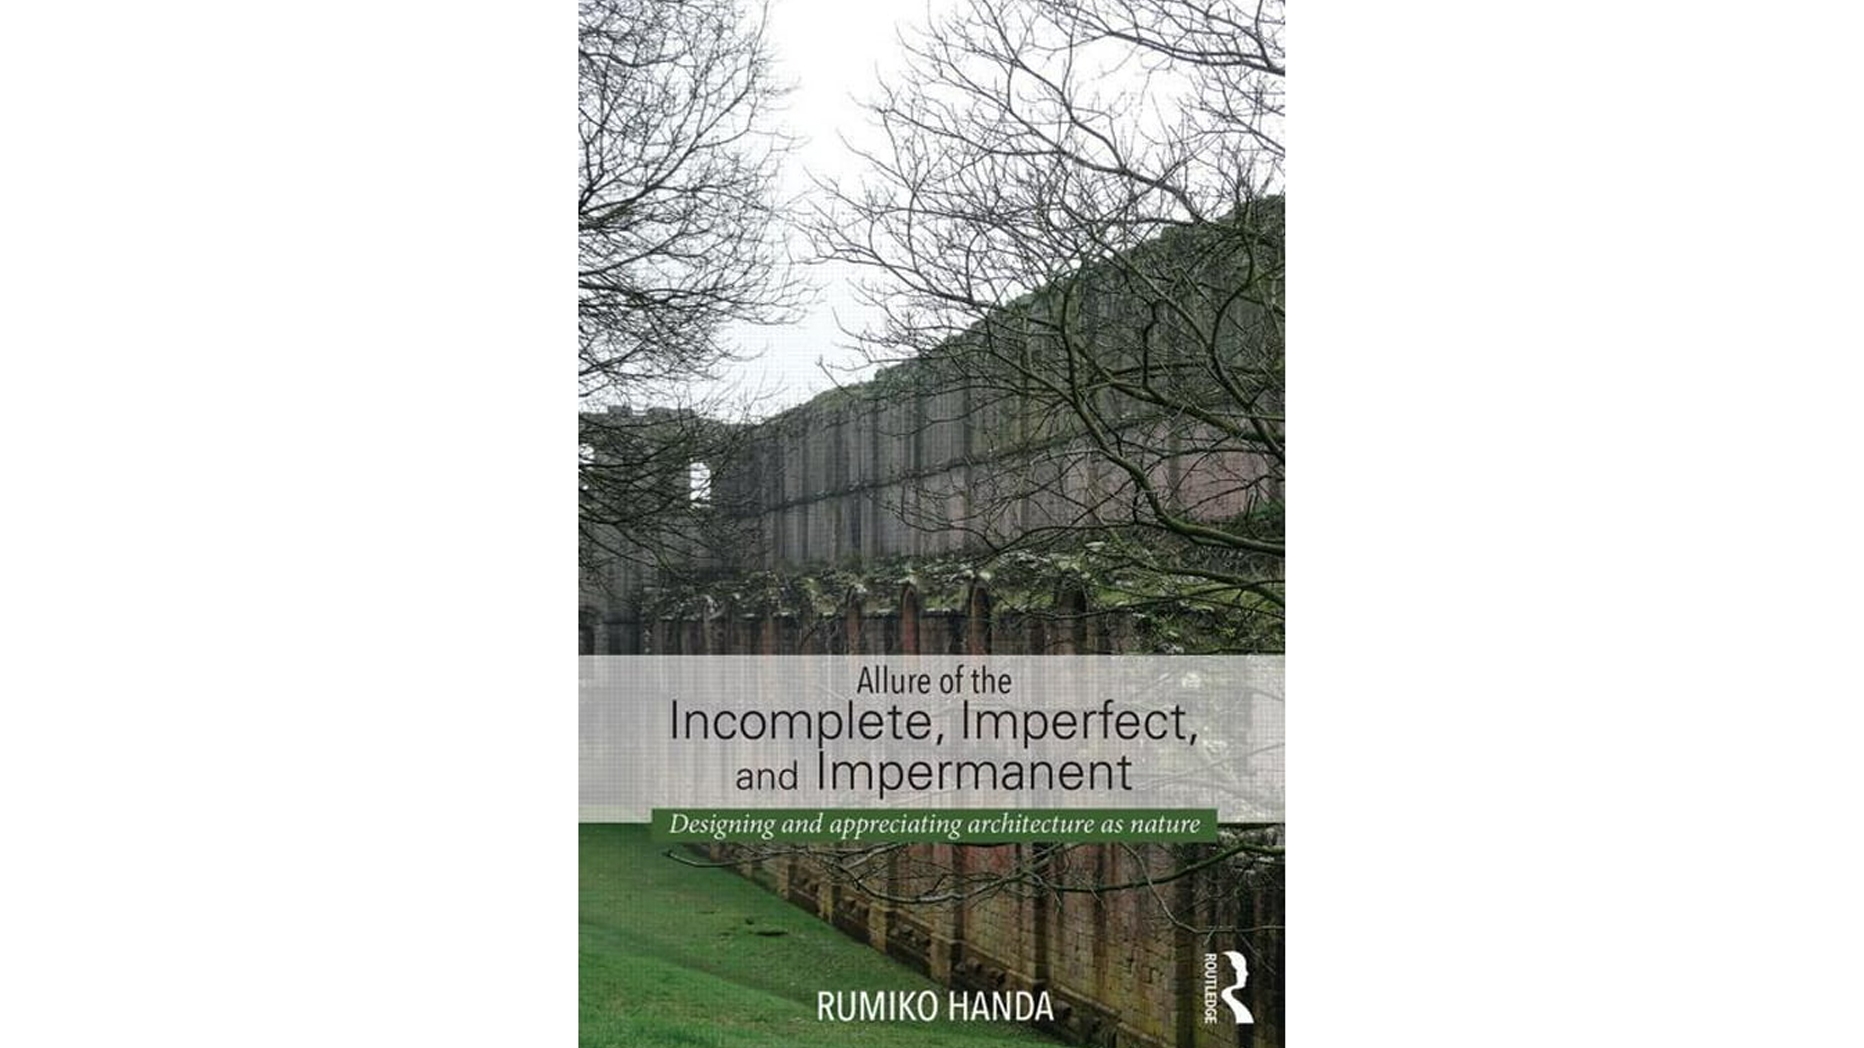 Allure of the Incomplete, Imperfect, and Impermanent book cover